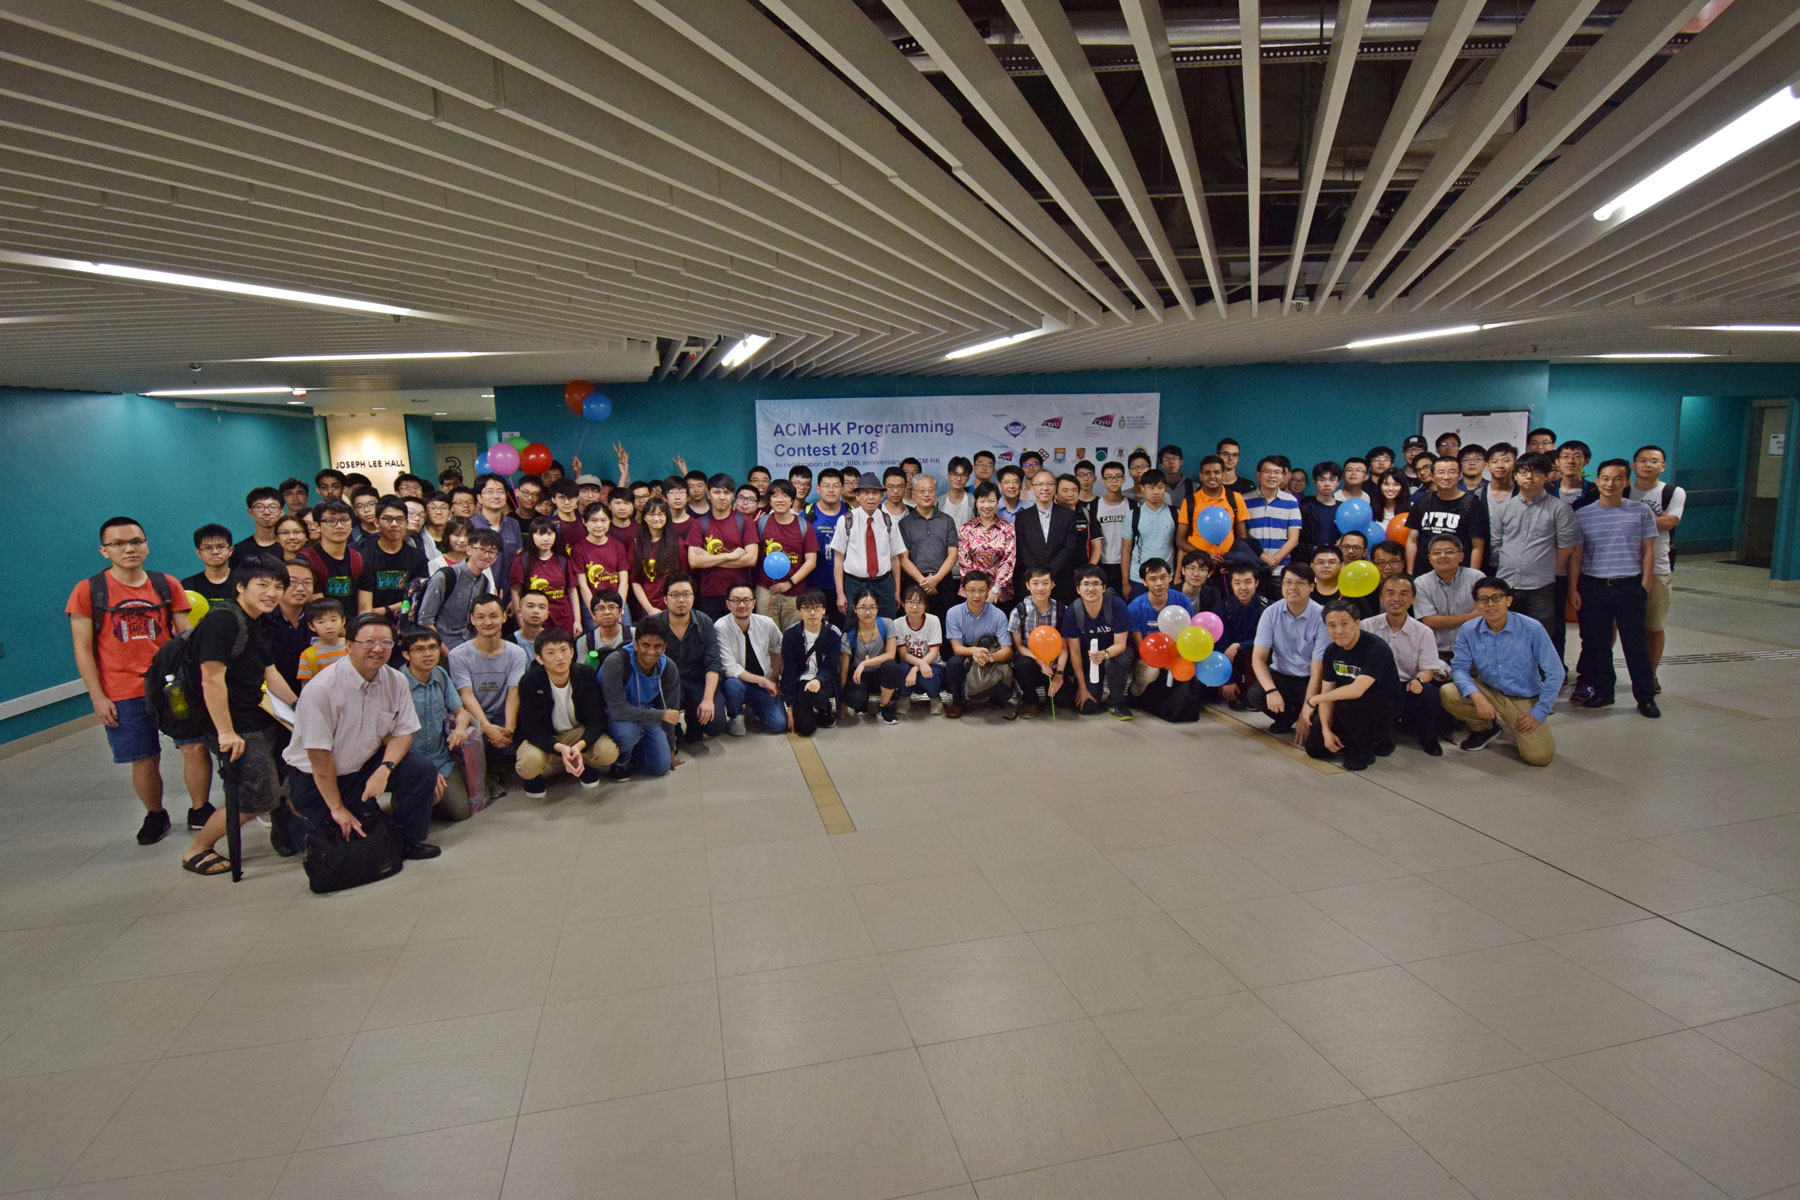 Mr. Victor Lam, Deputy Government Chief Information Officer at the Ceremony of the ACM-HK Programming Contest with Other Guests and Students